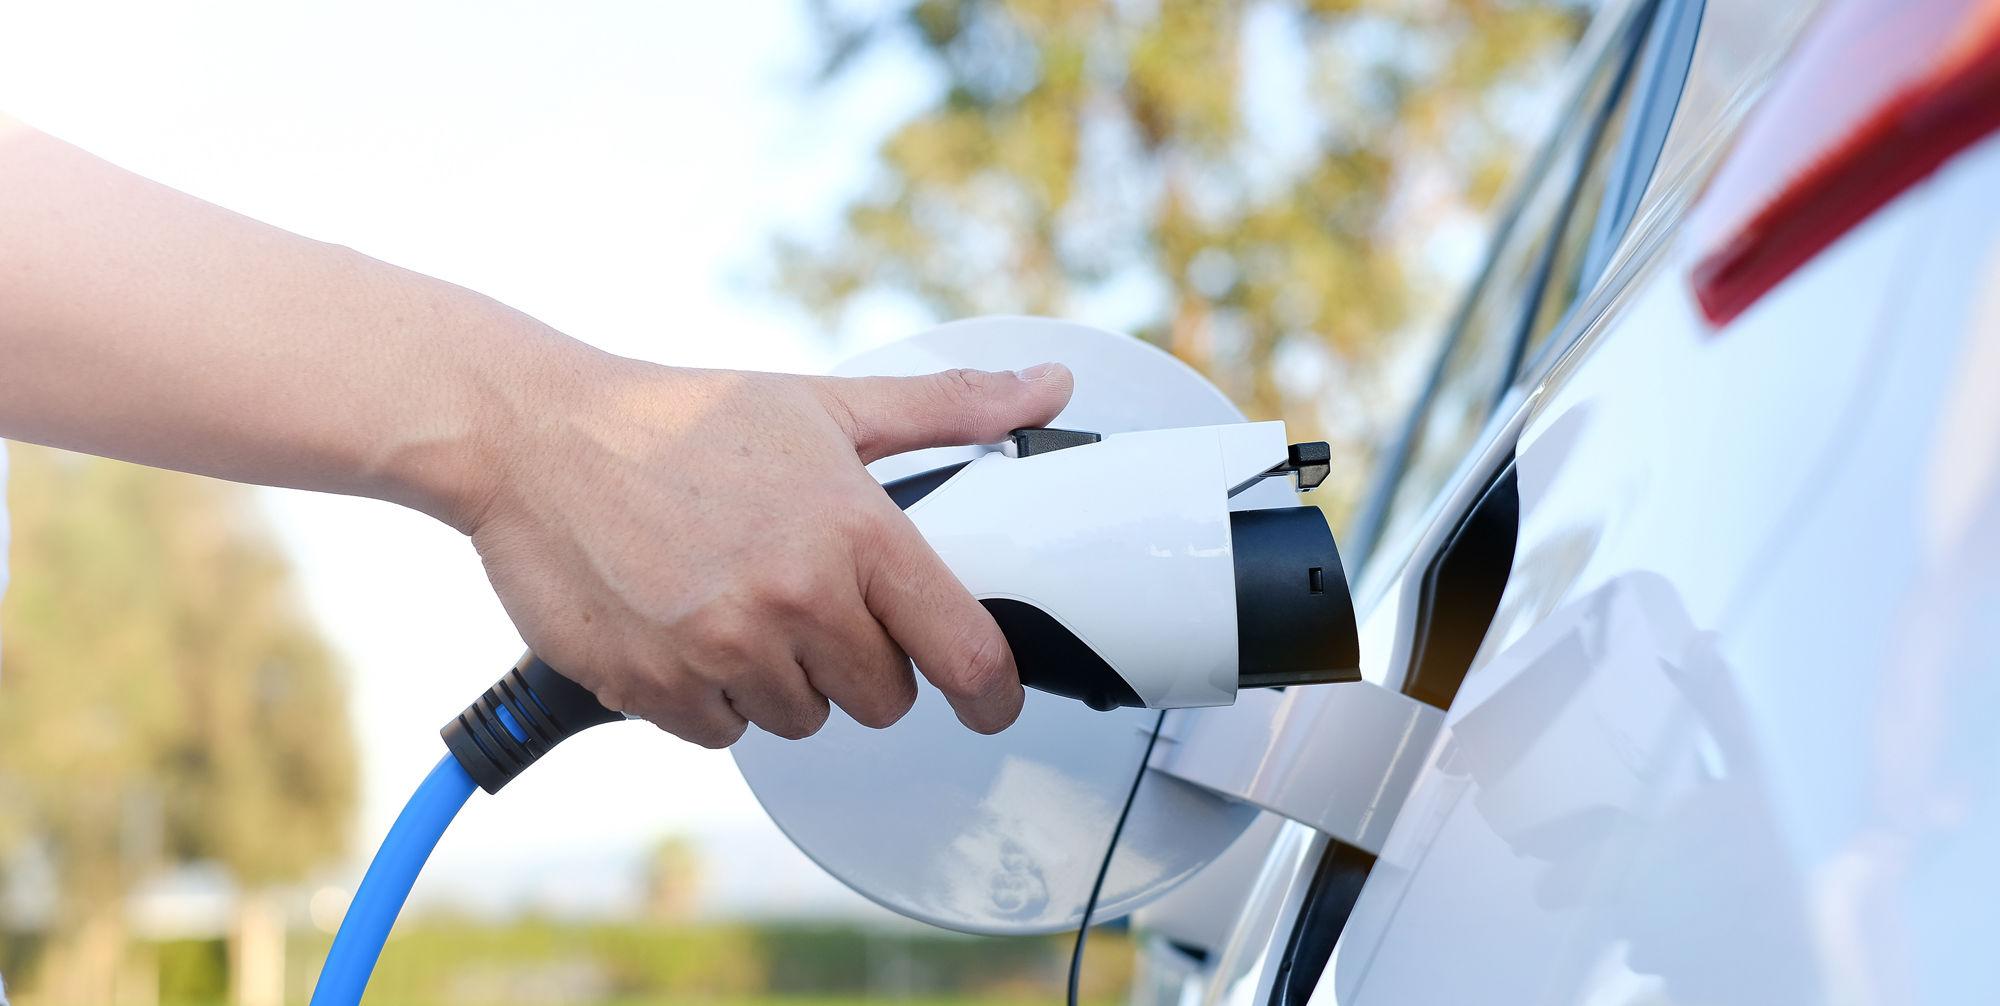 Charge UK has a new report out on EV charging